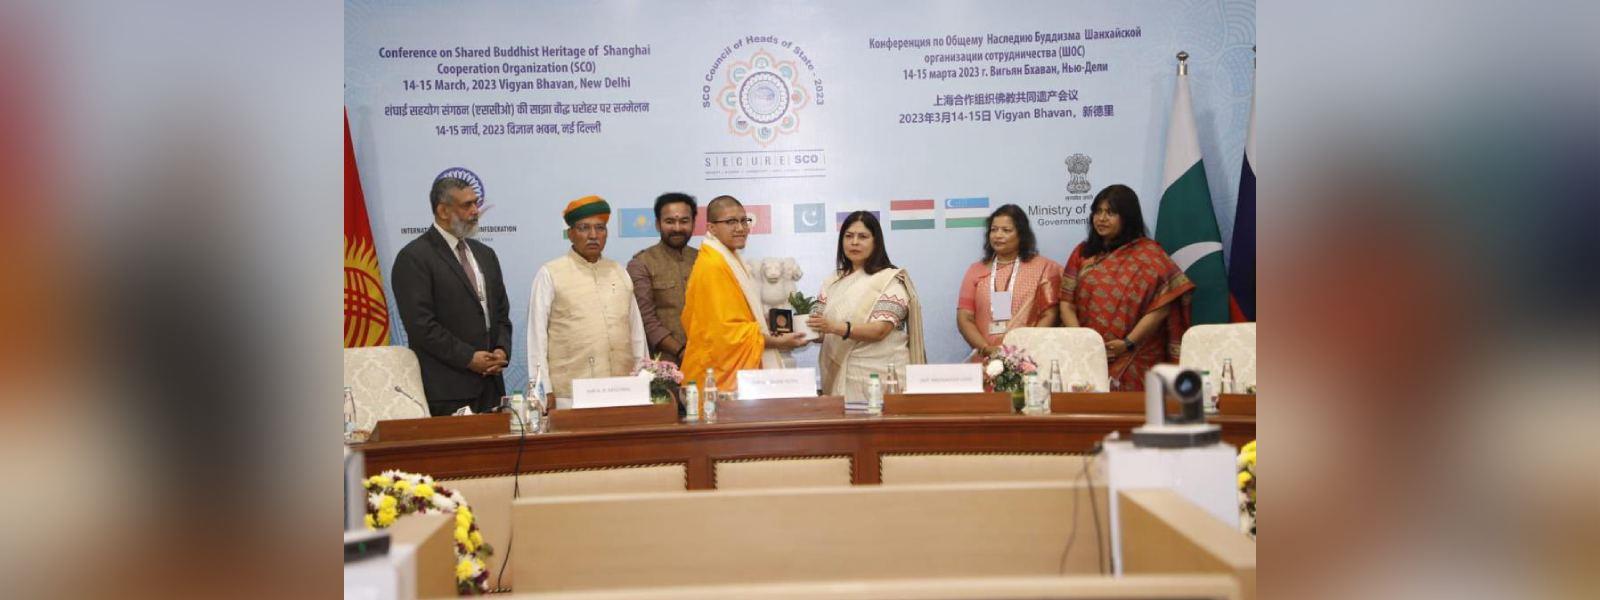 Minister of State for External Affairs Smt. Meenakashi Lekhi inaugurated the International Conference on Shared Buddhist Heritage of Shanghai Cooperation Organization in New Delhi